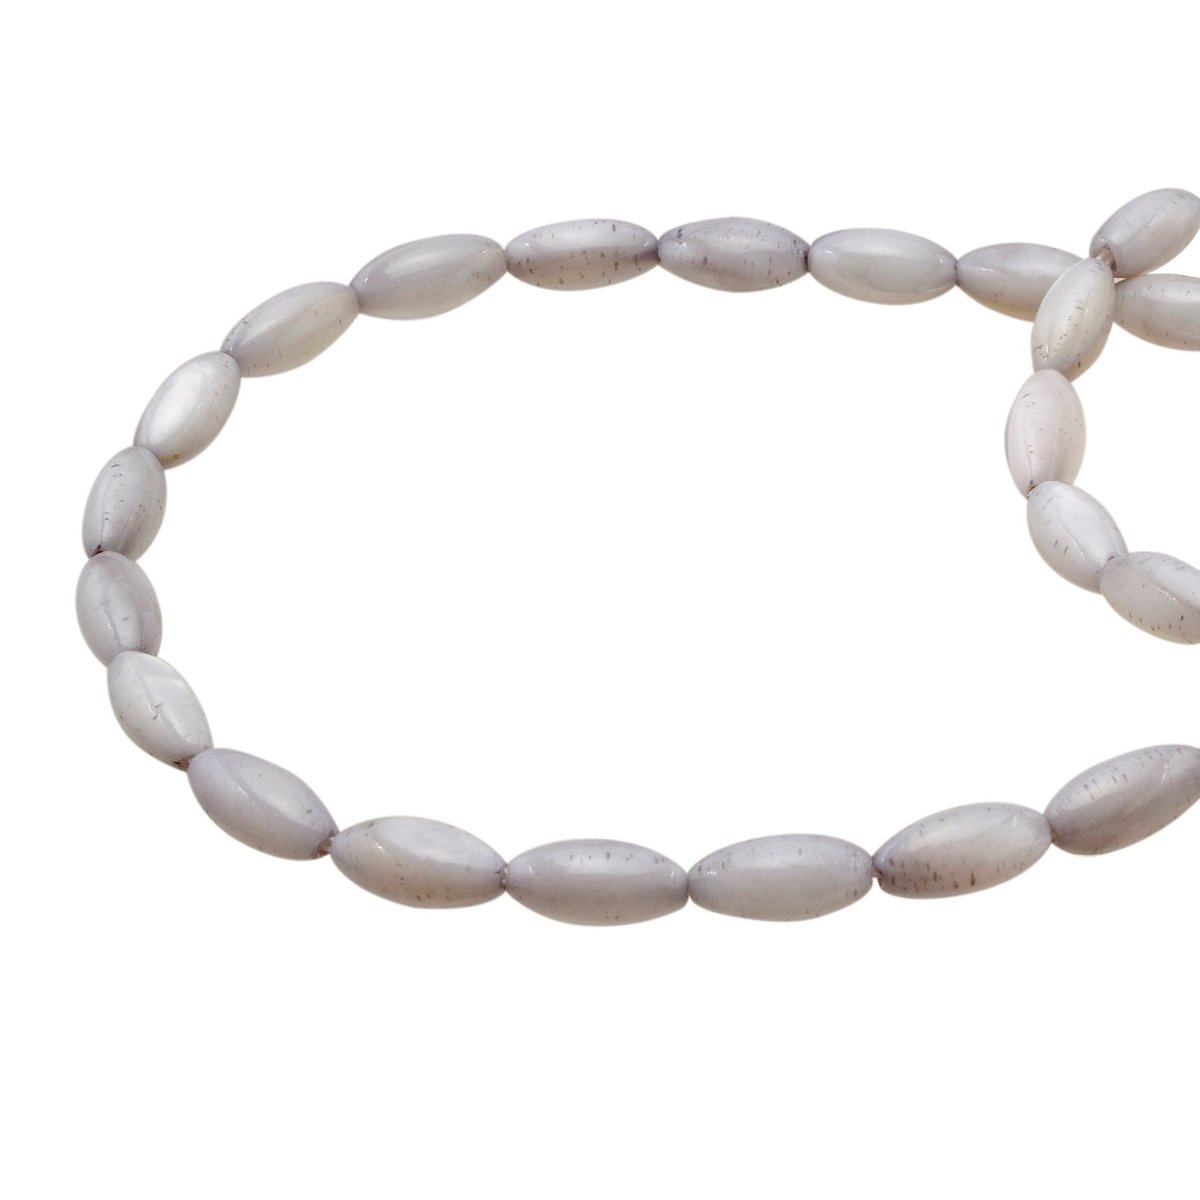 Natural Shell Oval Beads, Egg, Grey, White, Seashell, Sea, Beach, Ocean, Tropical, Travel, Necklace Bracelet DIY Bead Making, Jewelry Making - DLUXCA